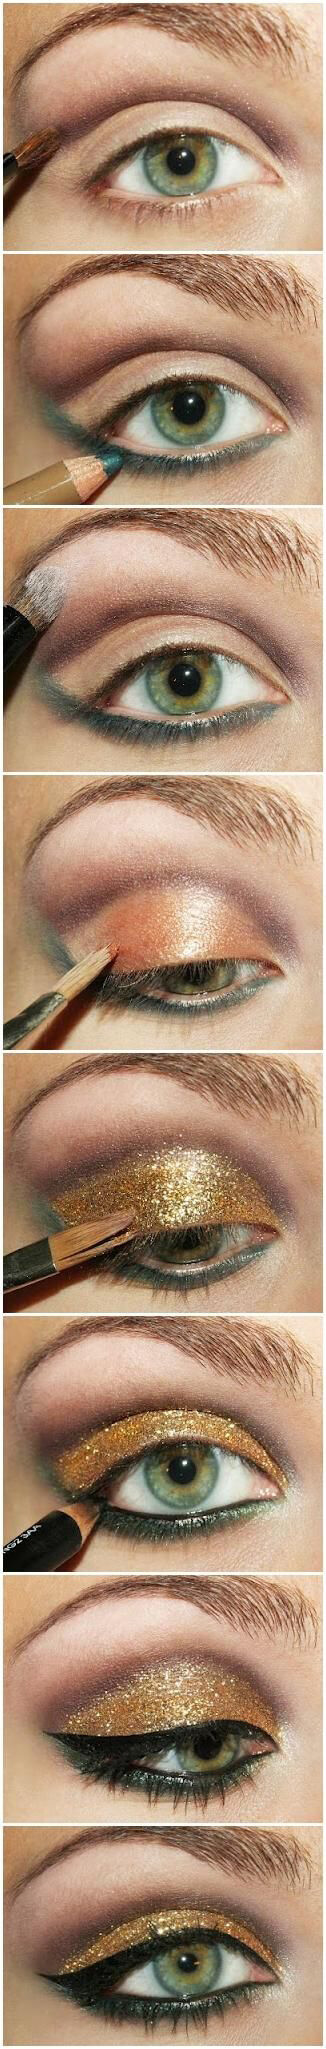 Create this vibrant look using three colors: gold, brown and green.